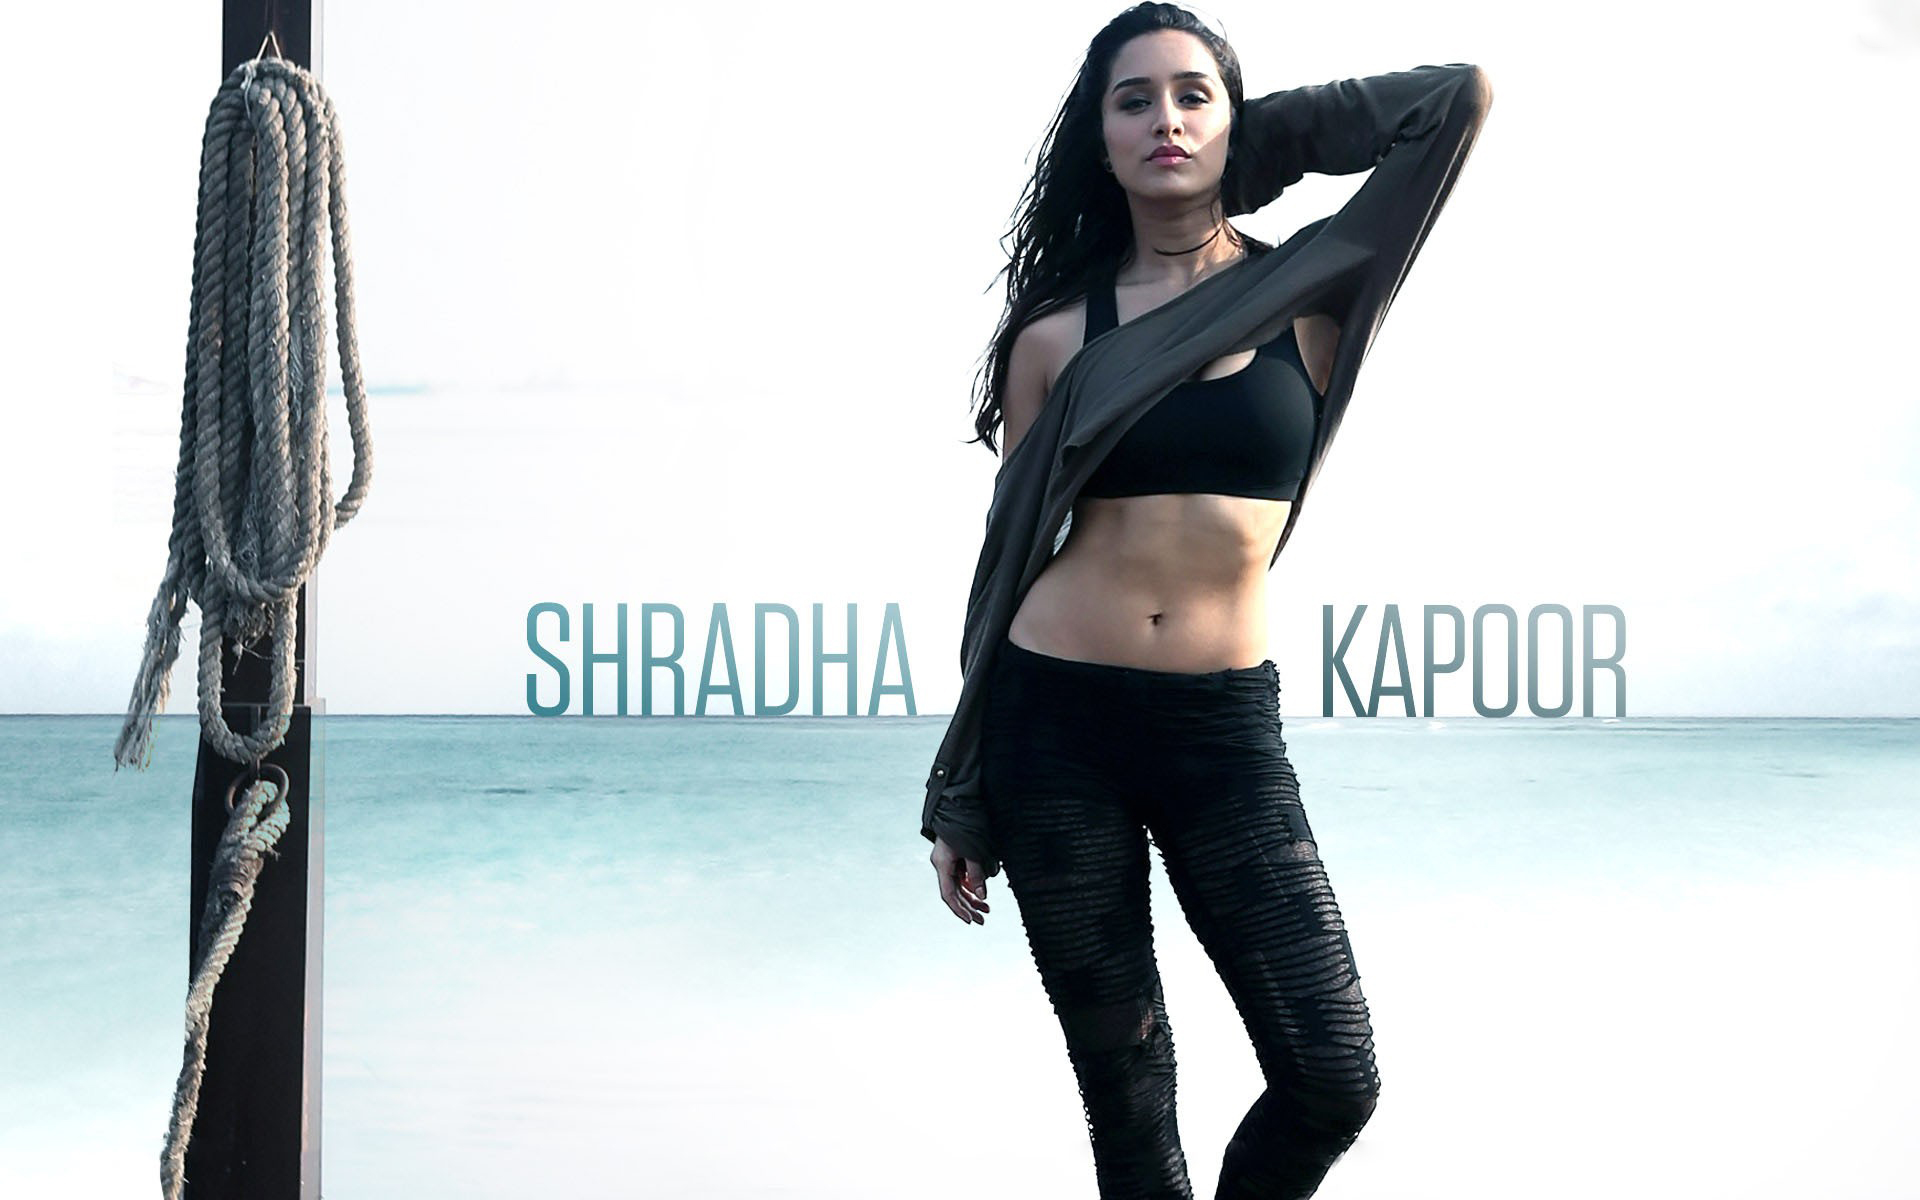 actress Shraddha Kapoor hd wallpapers,picture,wallpapers, image,shraddha kapoor desi look